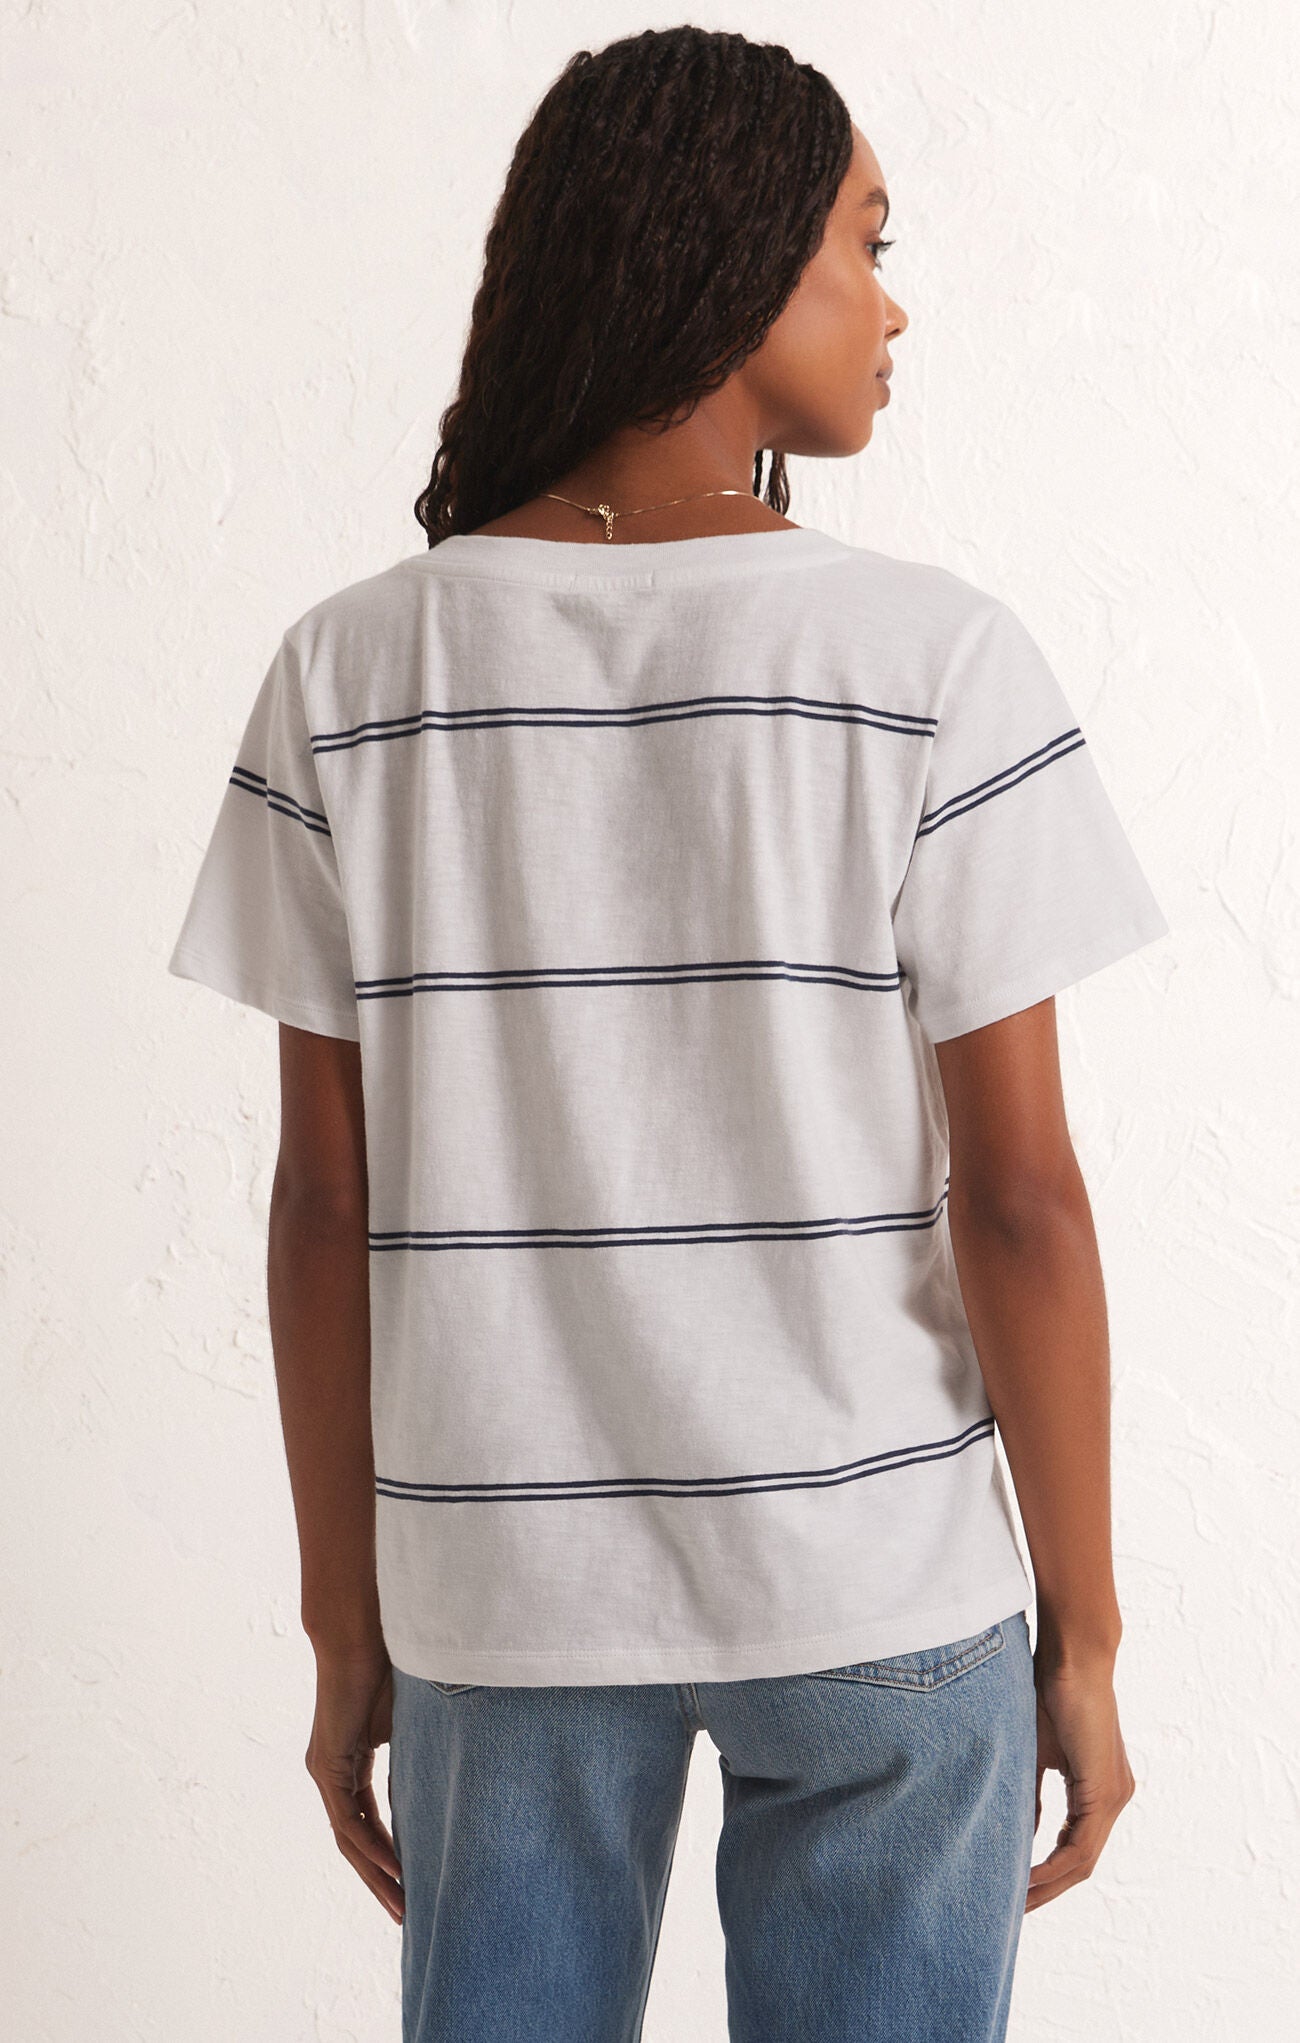 Girlfriend Twin Stripe V-Neck-Short Sleeves-Vixen Collection, Day Spa and Women's Boutique Located in Seattle, Washington